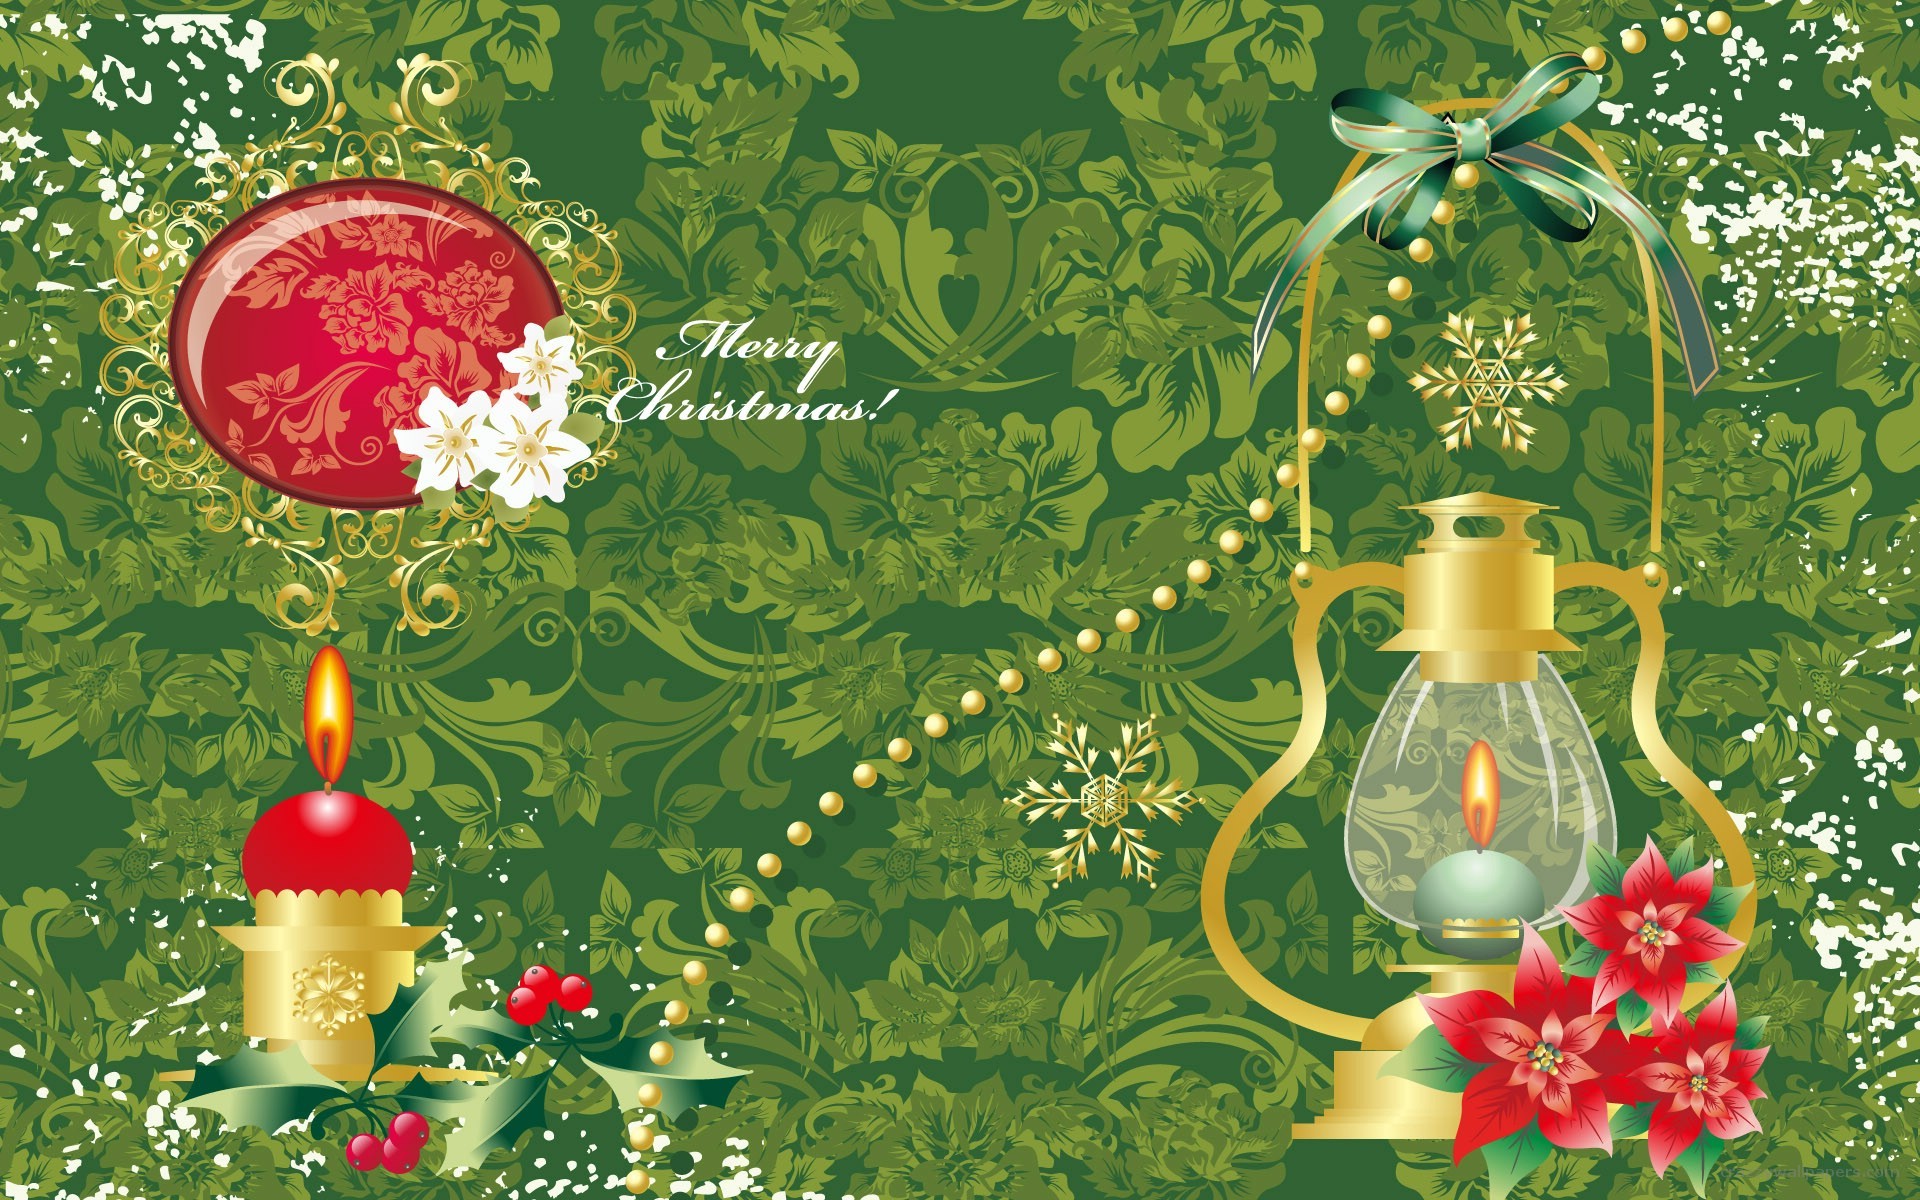 1920x1200 35 Christmas Wallpapers for Decorating your Desktop | Webdesign Core